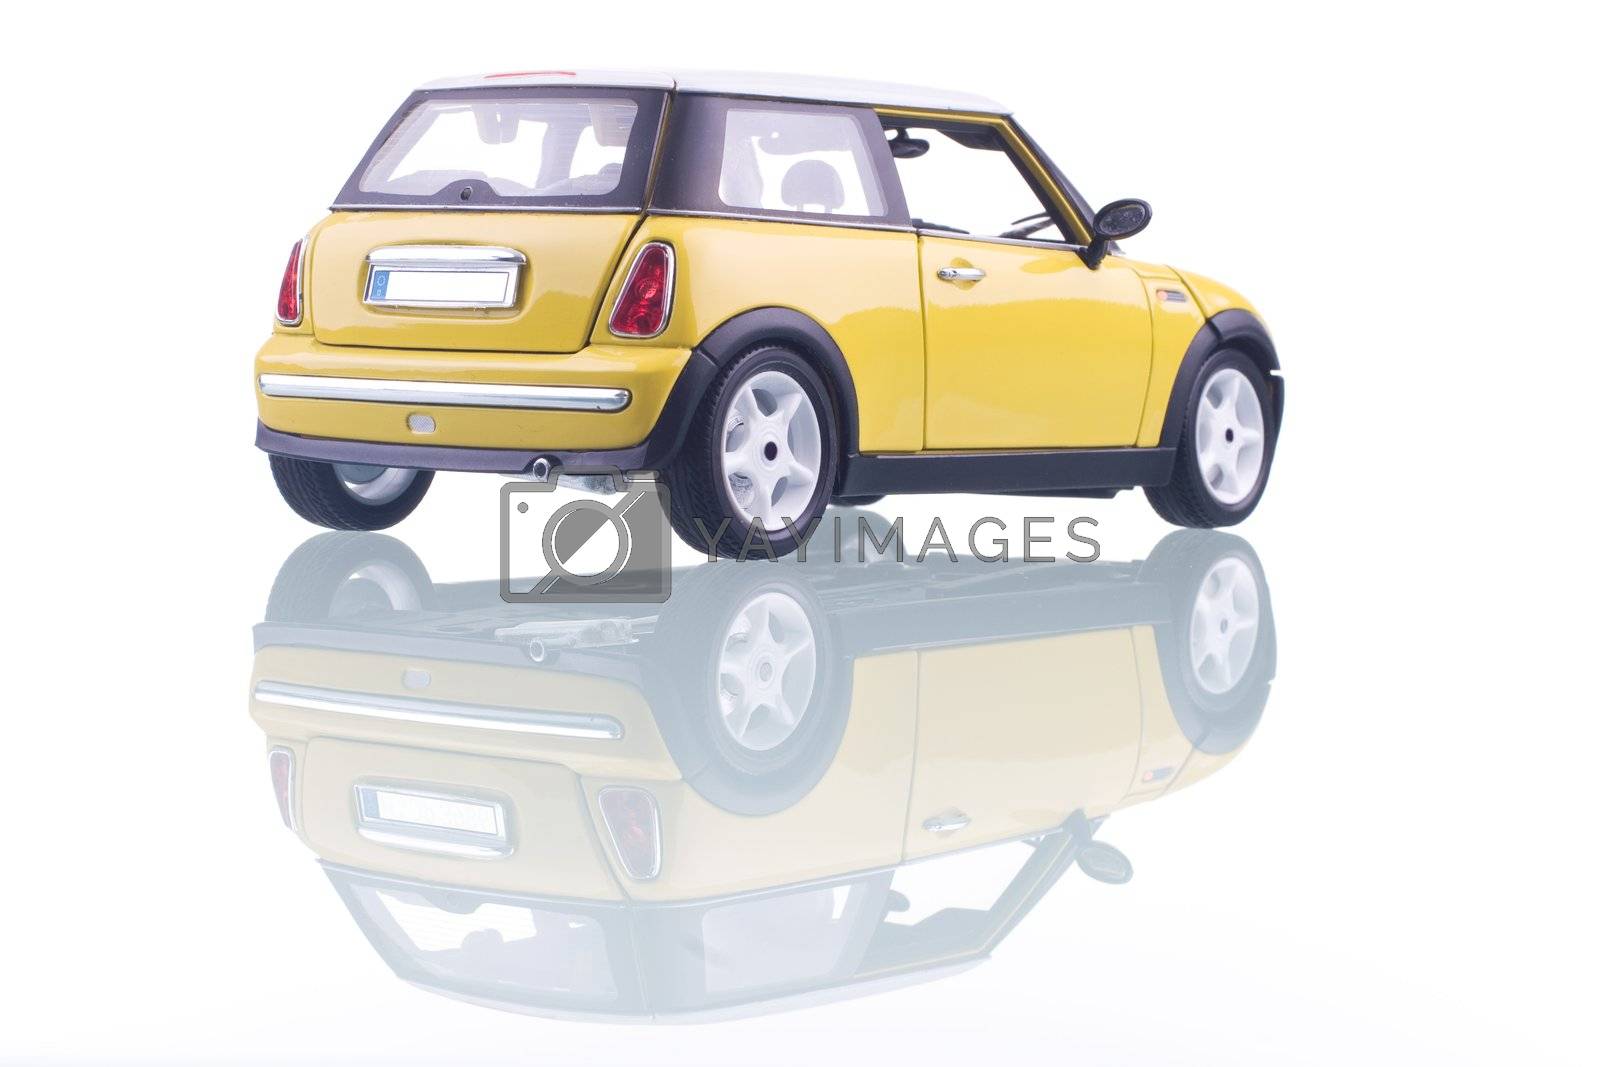 Royalty free image of Yellow Car by ajn